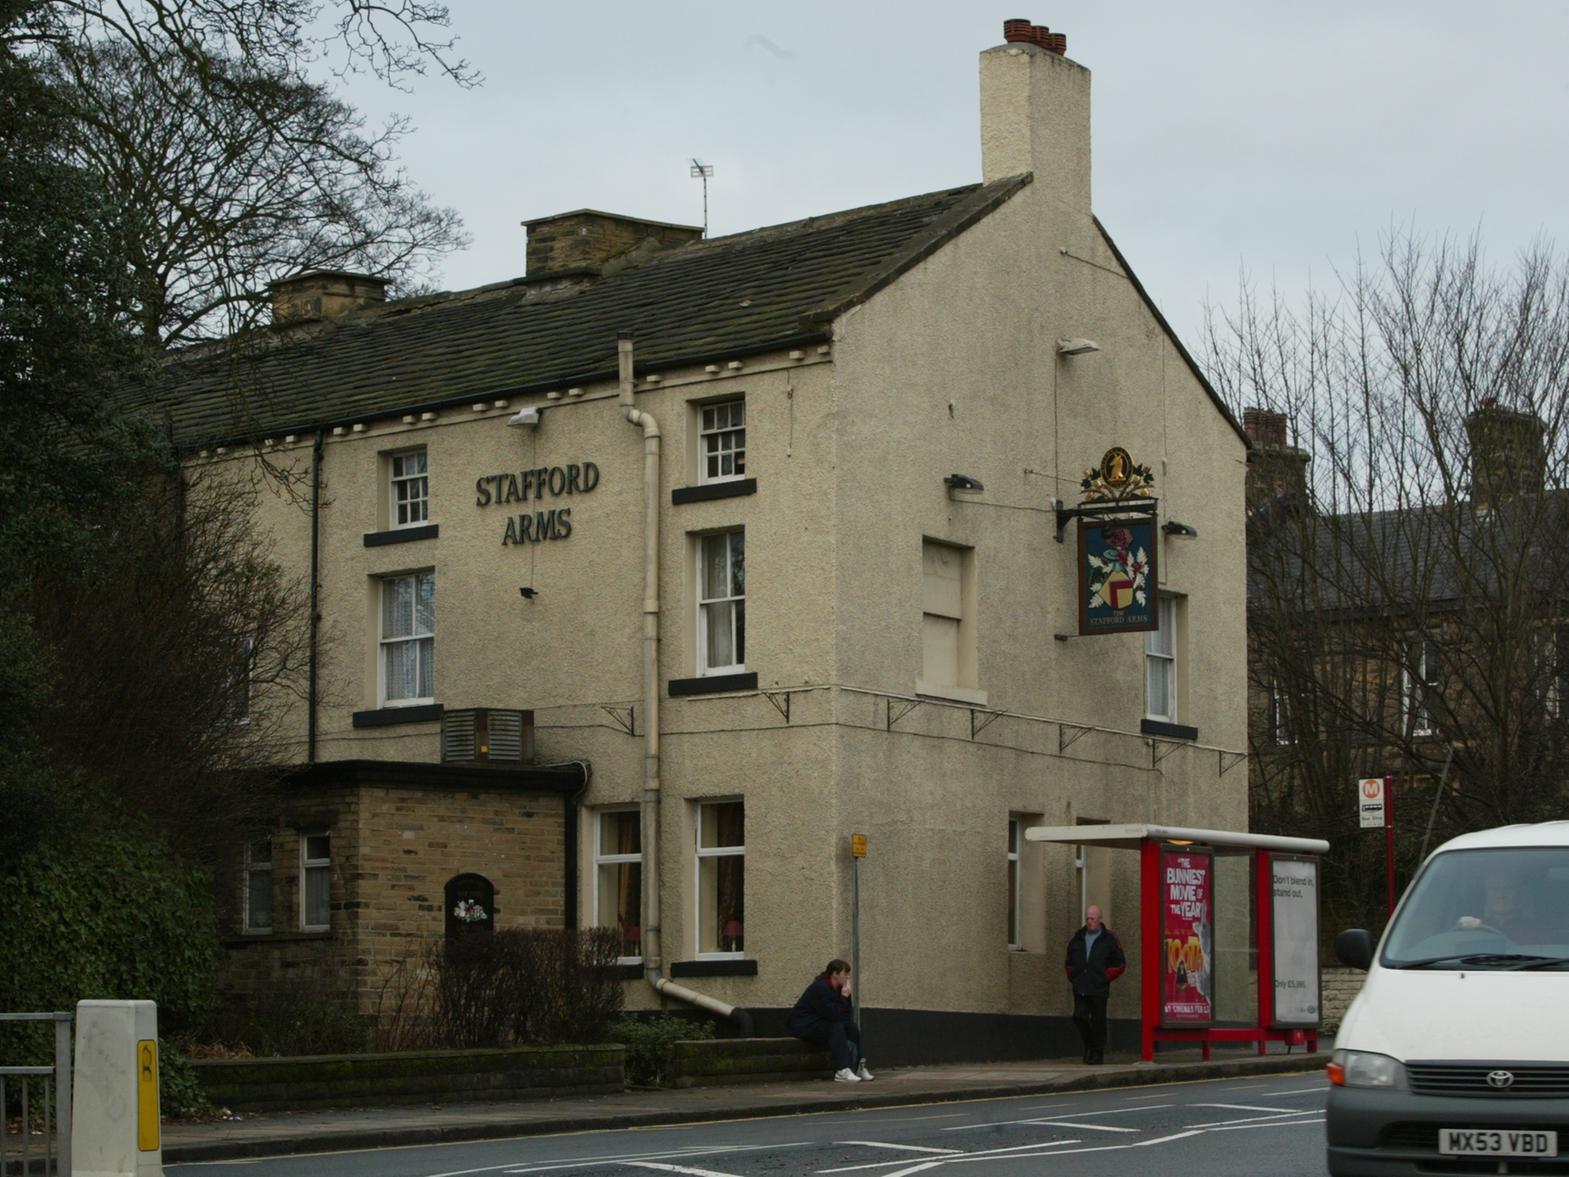 This pub was located on Huddersfield Road. Since it closed the building has housed a number of restaurants. Italian Pizzeria and Restaurant La Tradizione can now be found there.